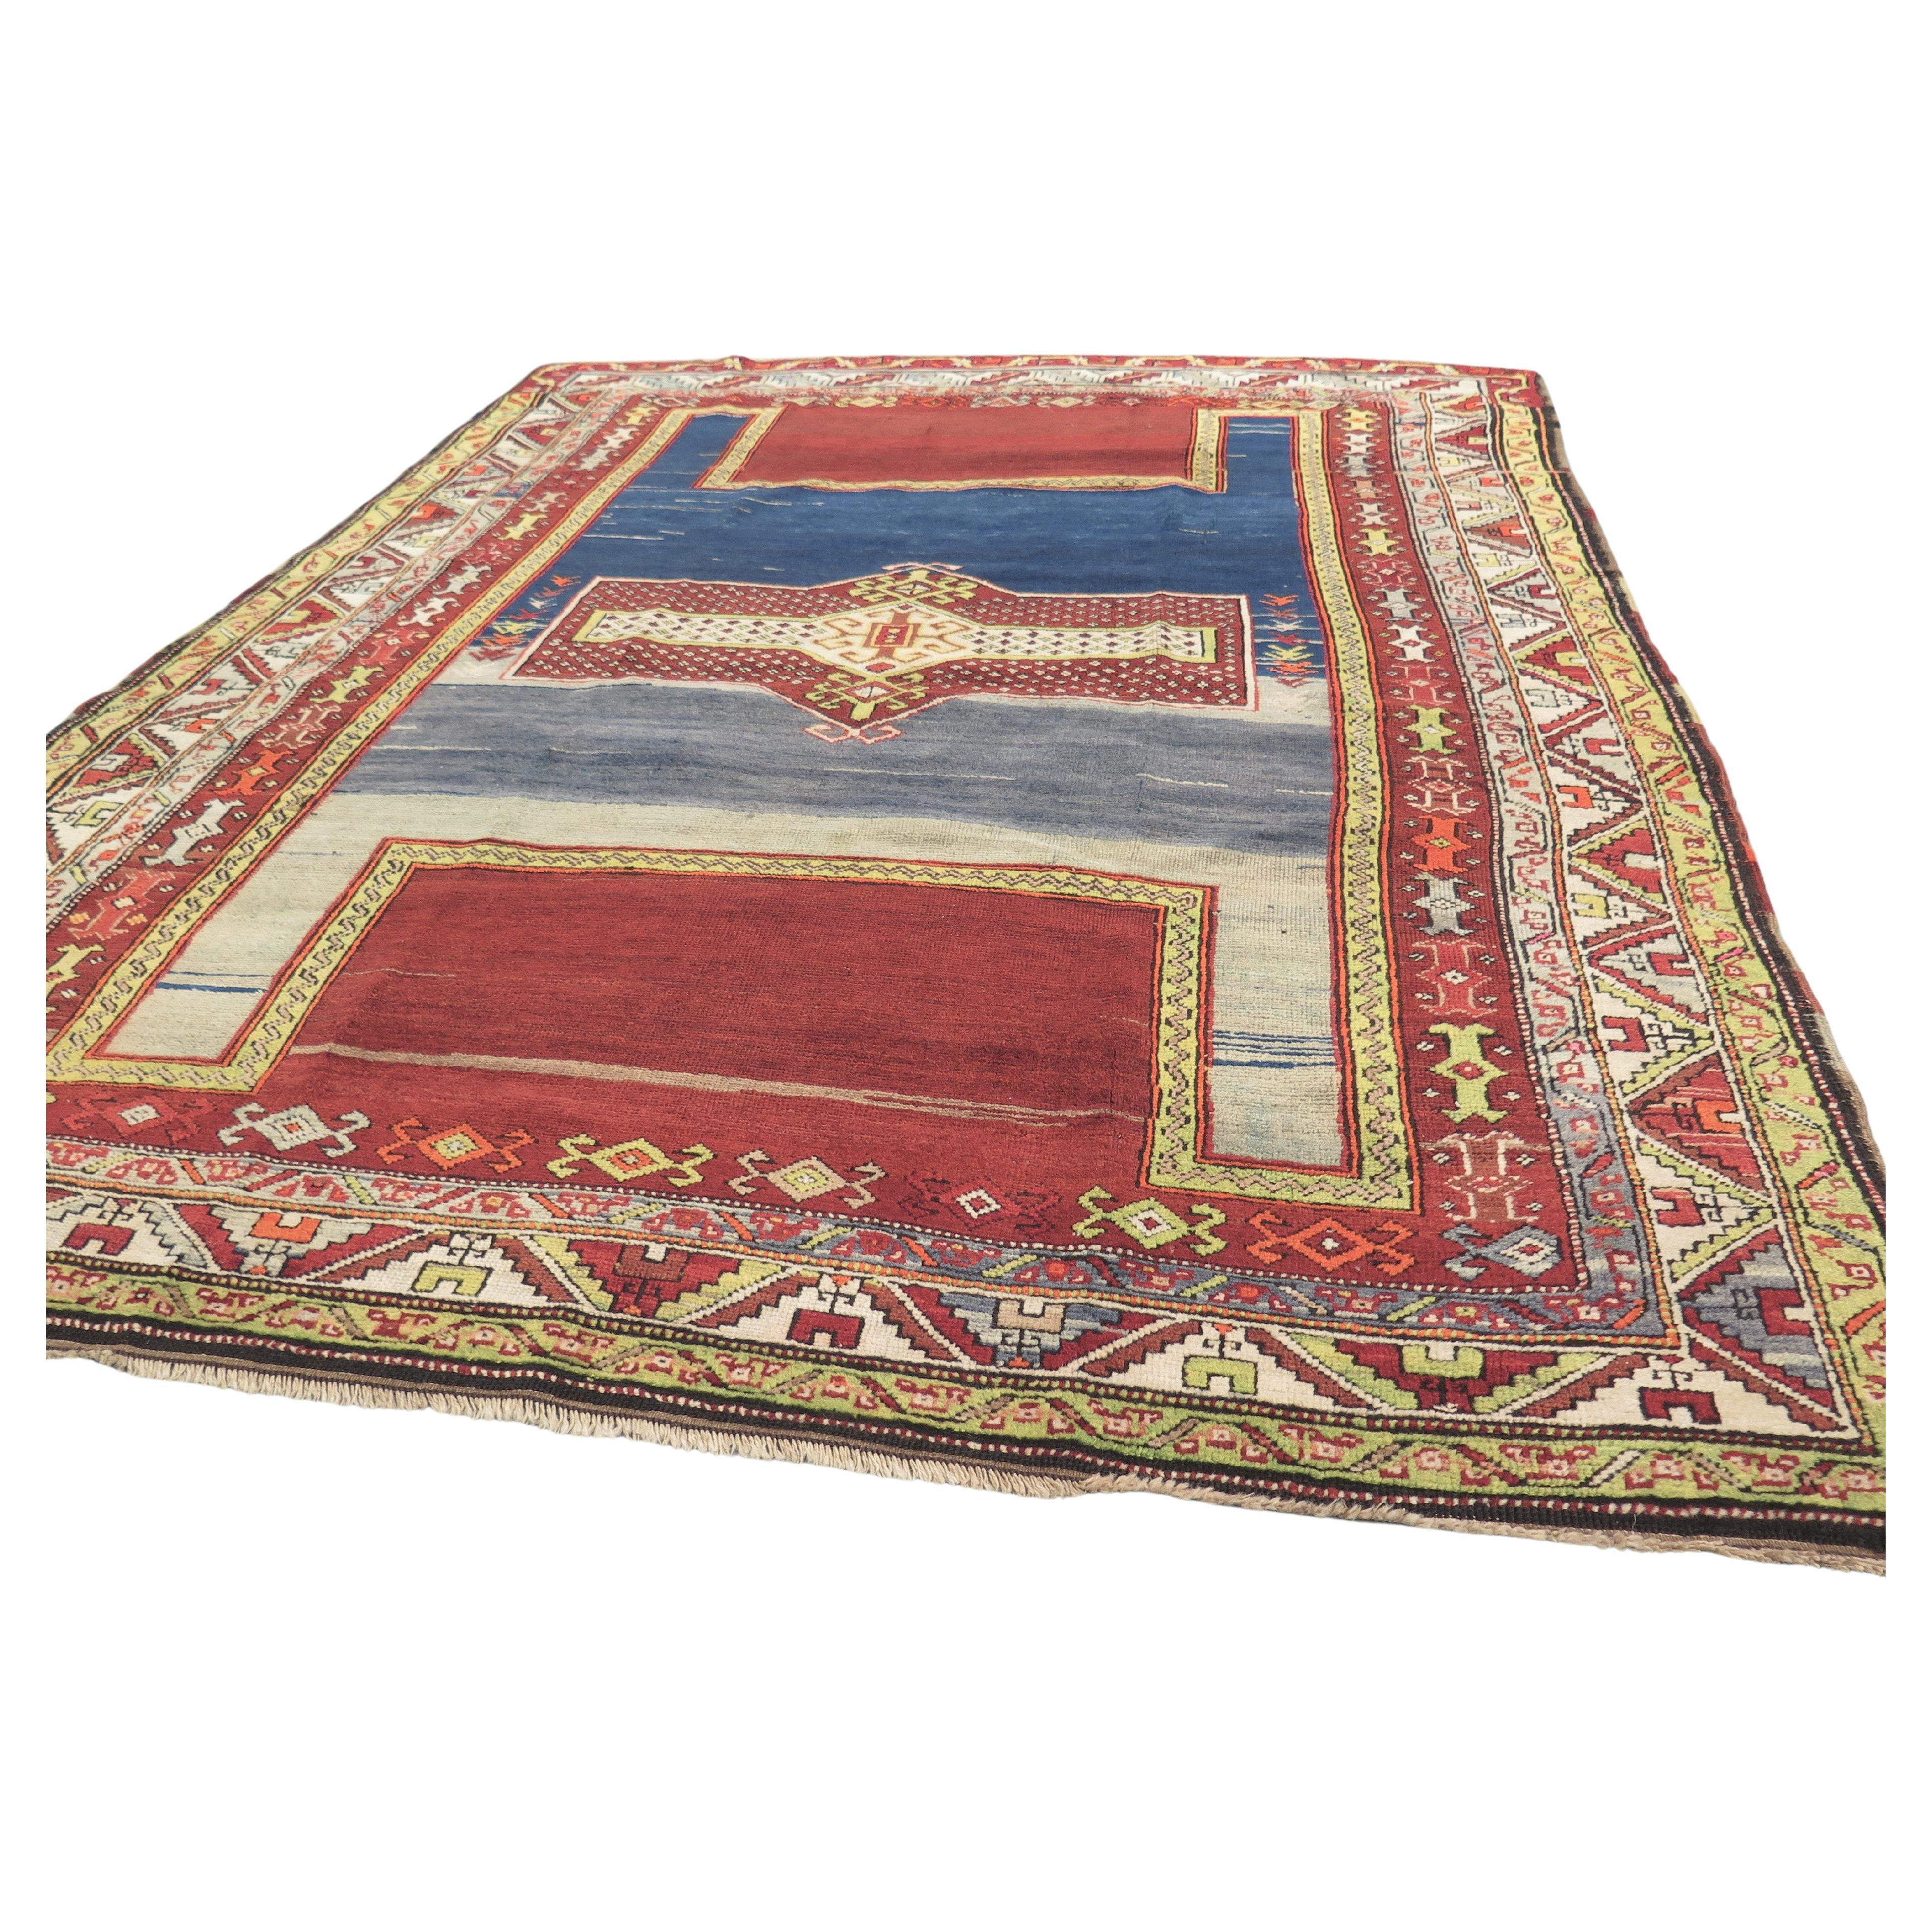 Tapis d'appoint Shirvan, vers 1900